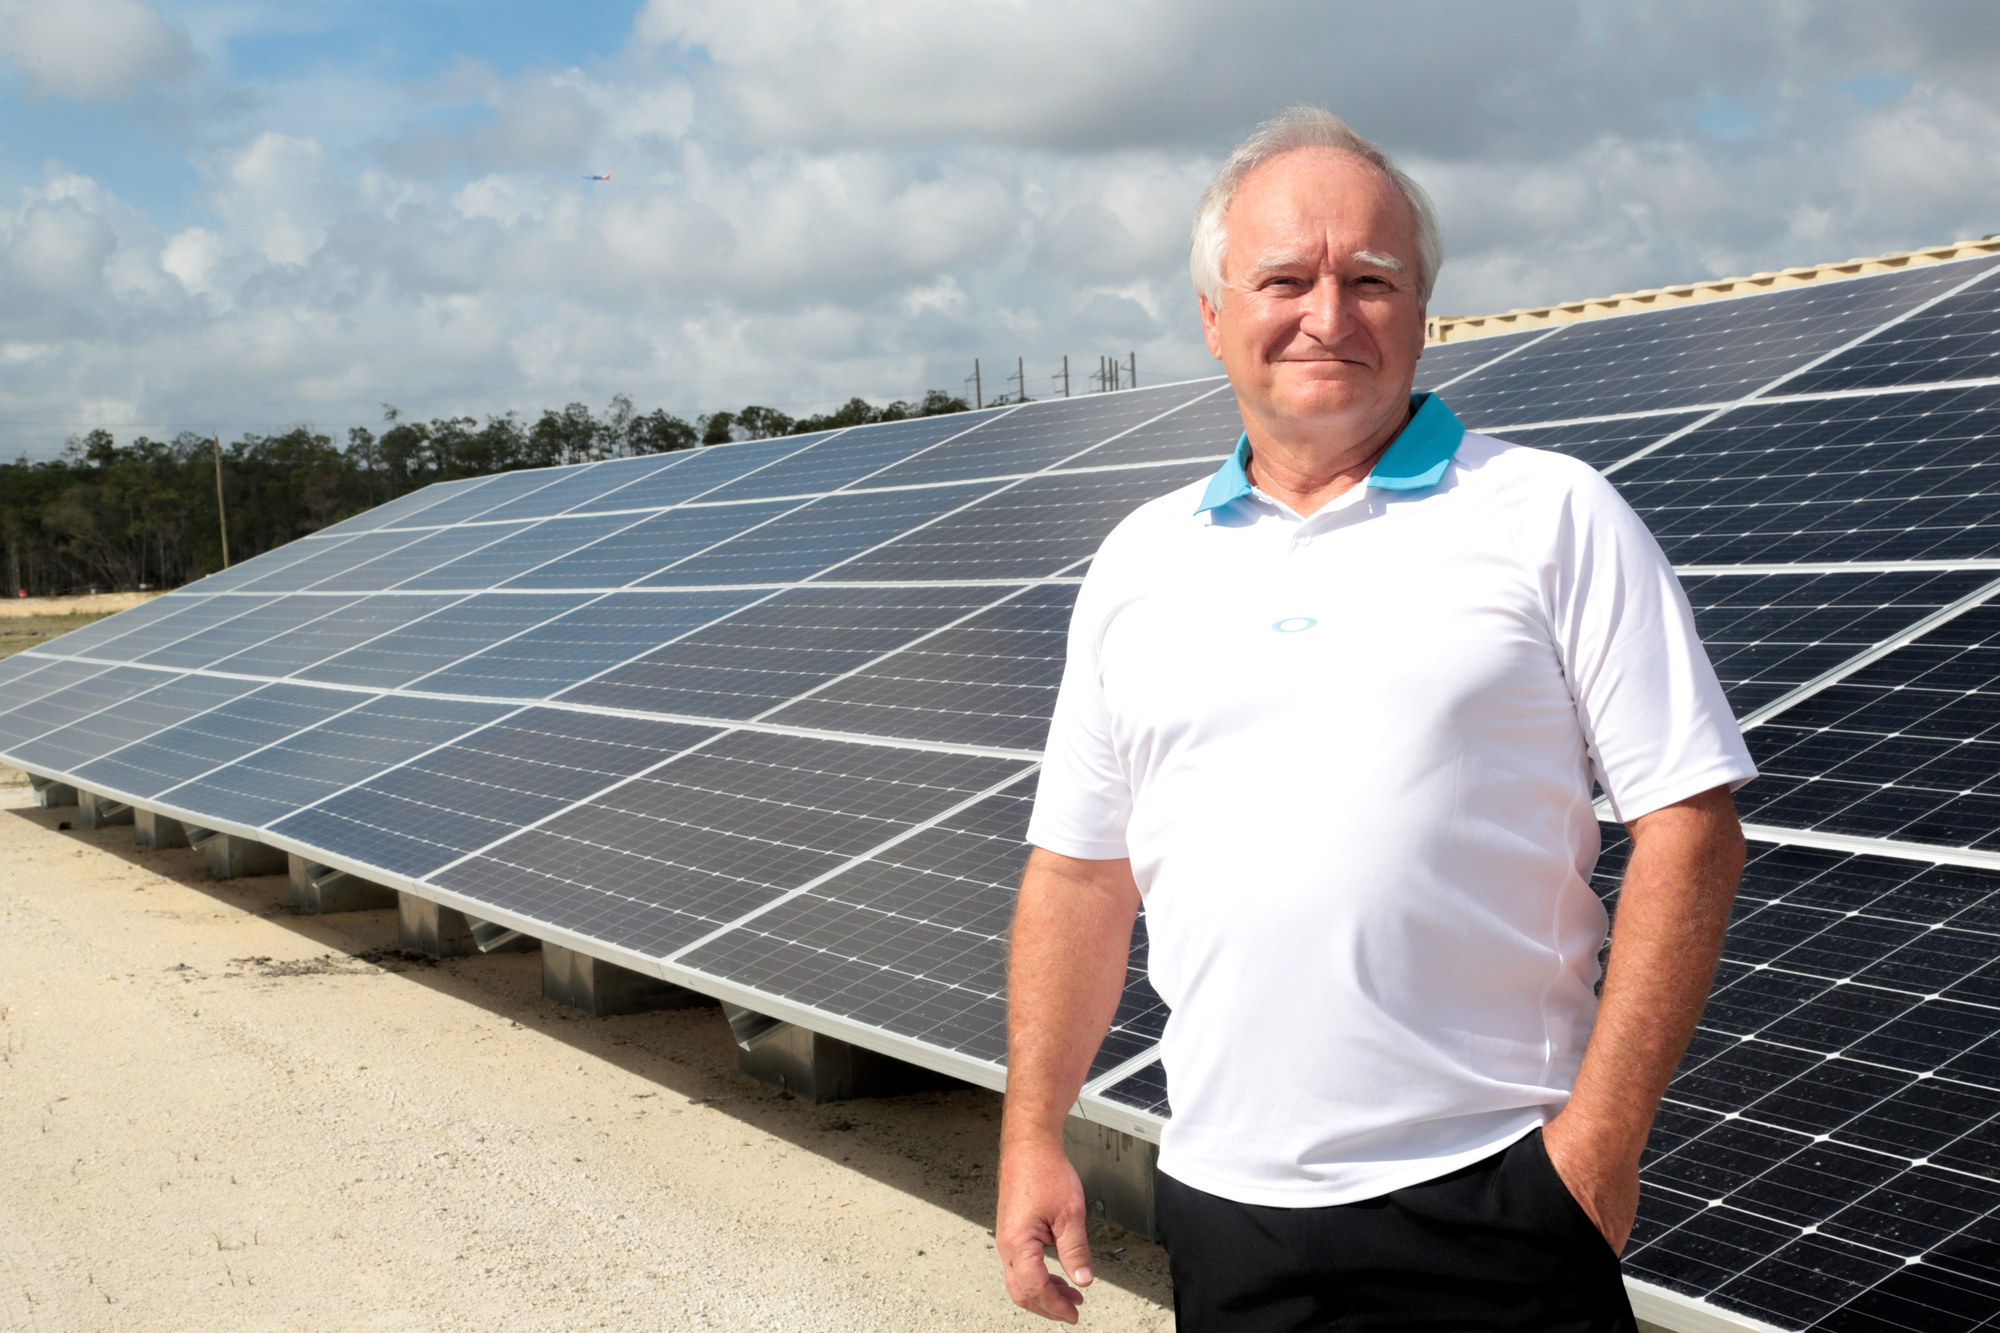 Paul Hardy is encouraging implementation of sustainable energy in  Alico ITEC Park. To set the example, this solar array powers the onsite trailer he uses for an office. Stefania Pifferi photo